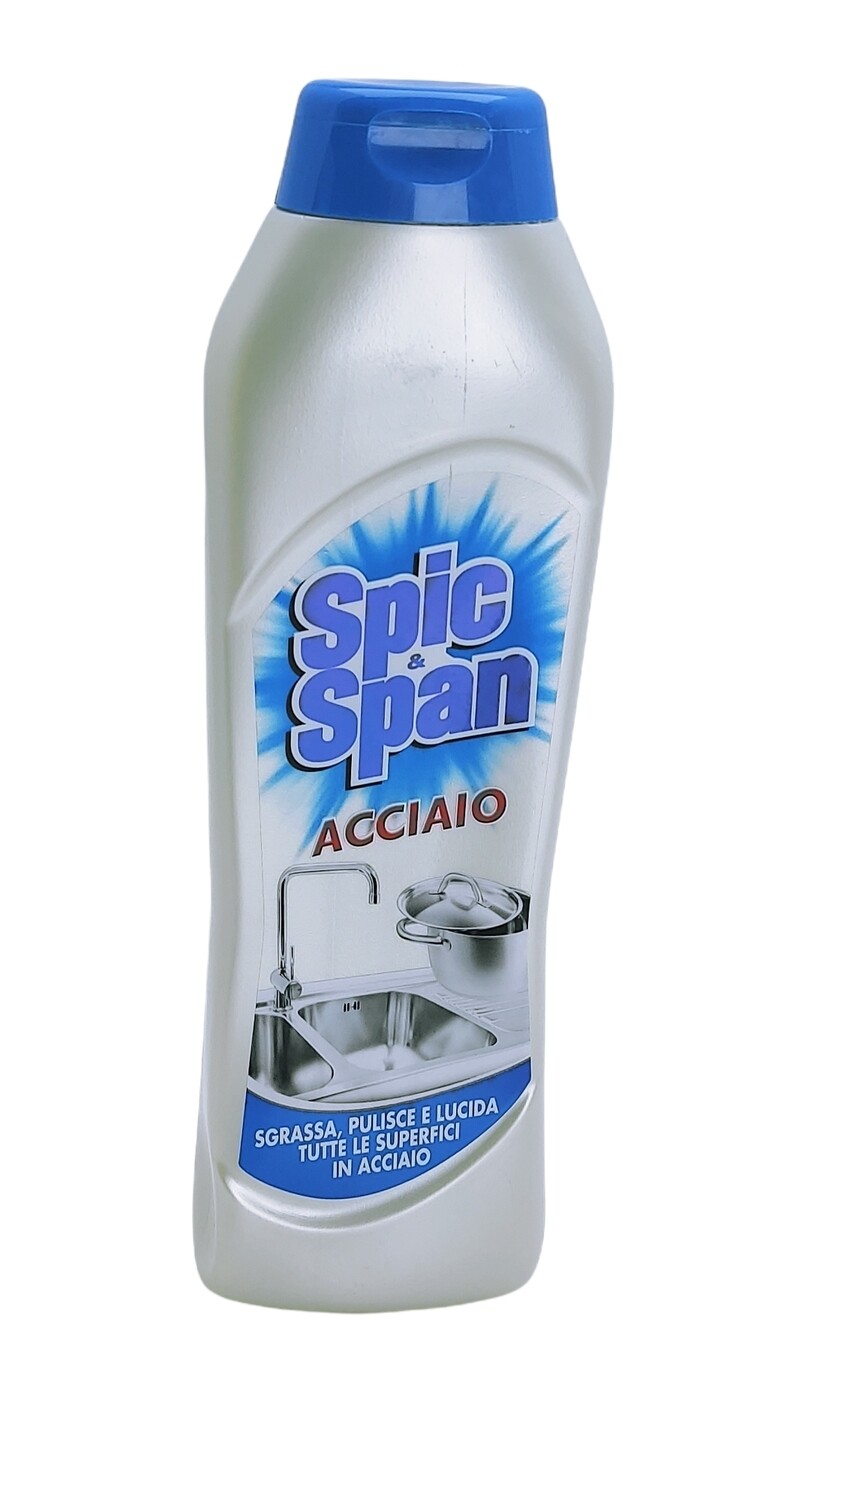 SPIC SPAN ACCIAIO STEEL CLEANER